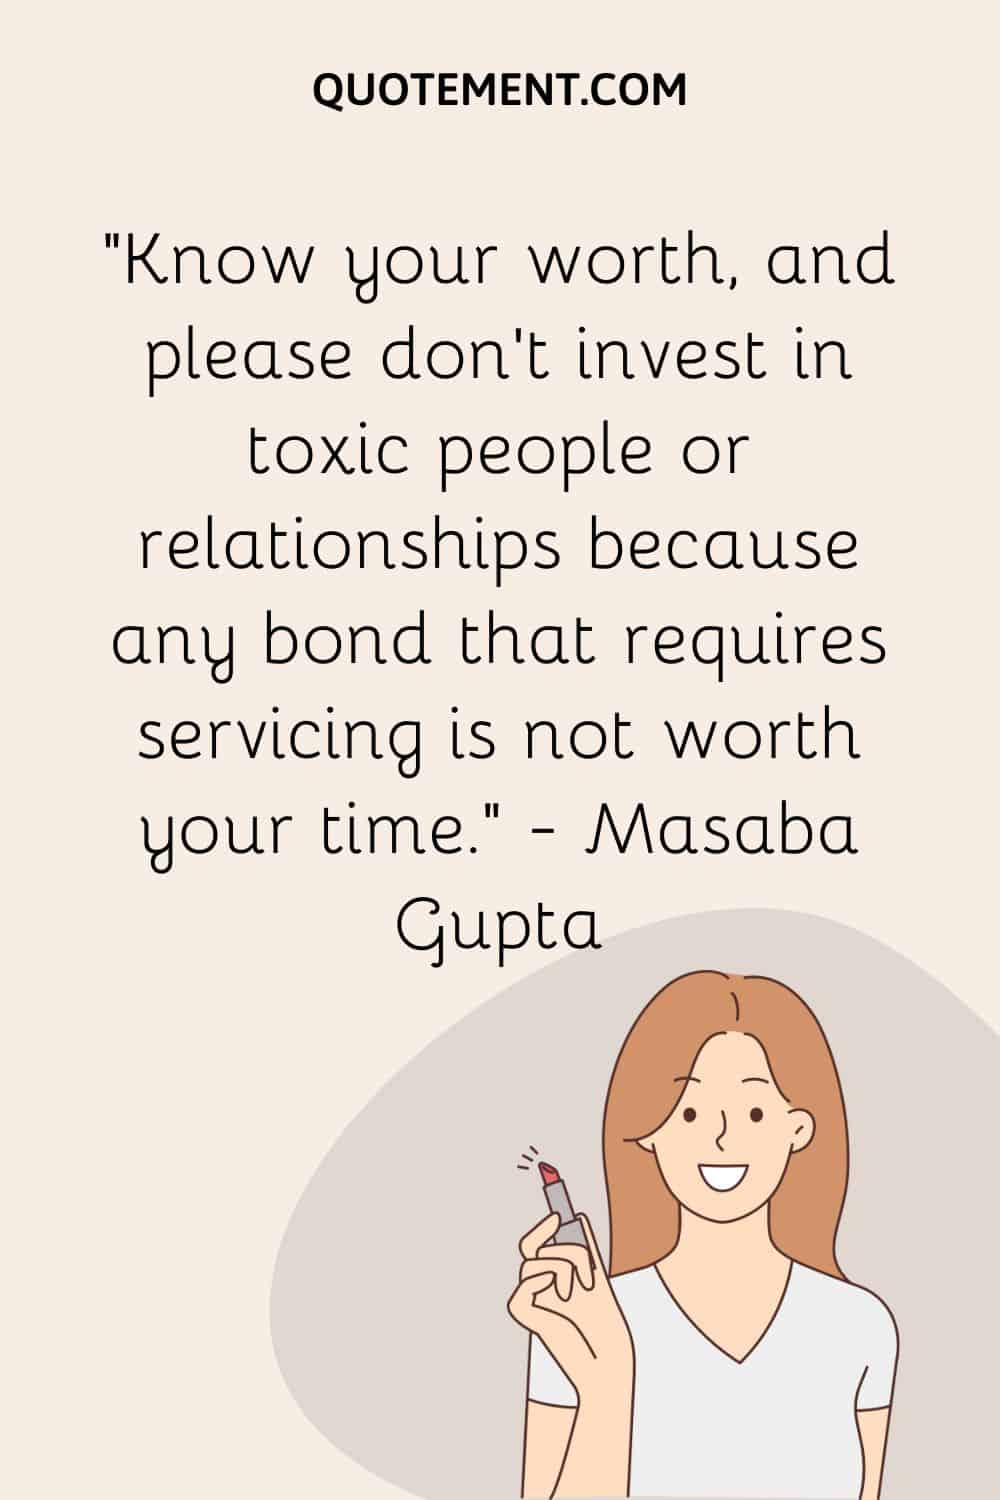 Know your worth, and please don’t invest in toxic people or relationships because any bond that requires servicing is not worth your time